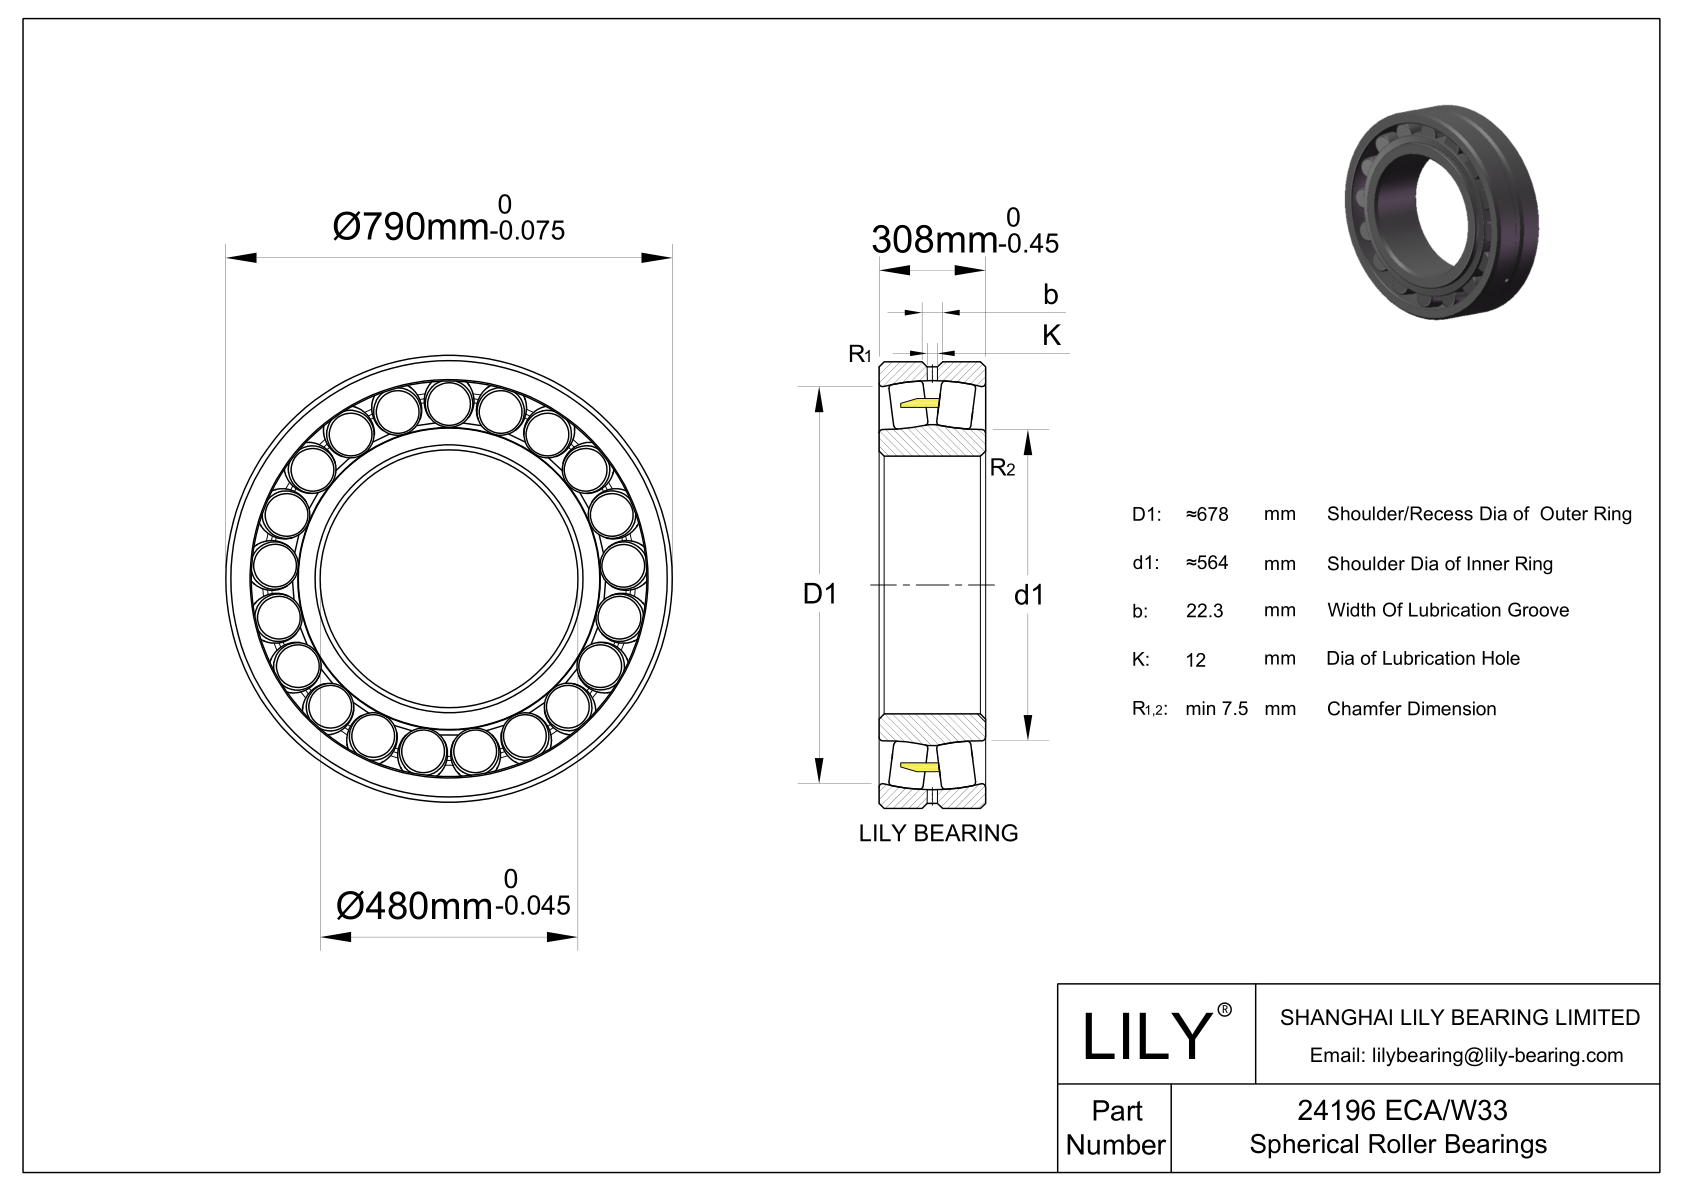 24196 ECA/W33 Double Row Spherical Roller Bearing cad drawing